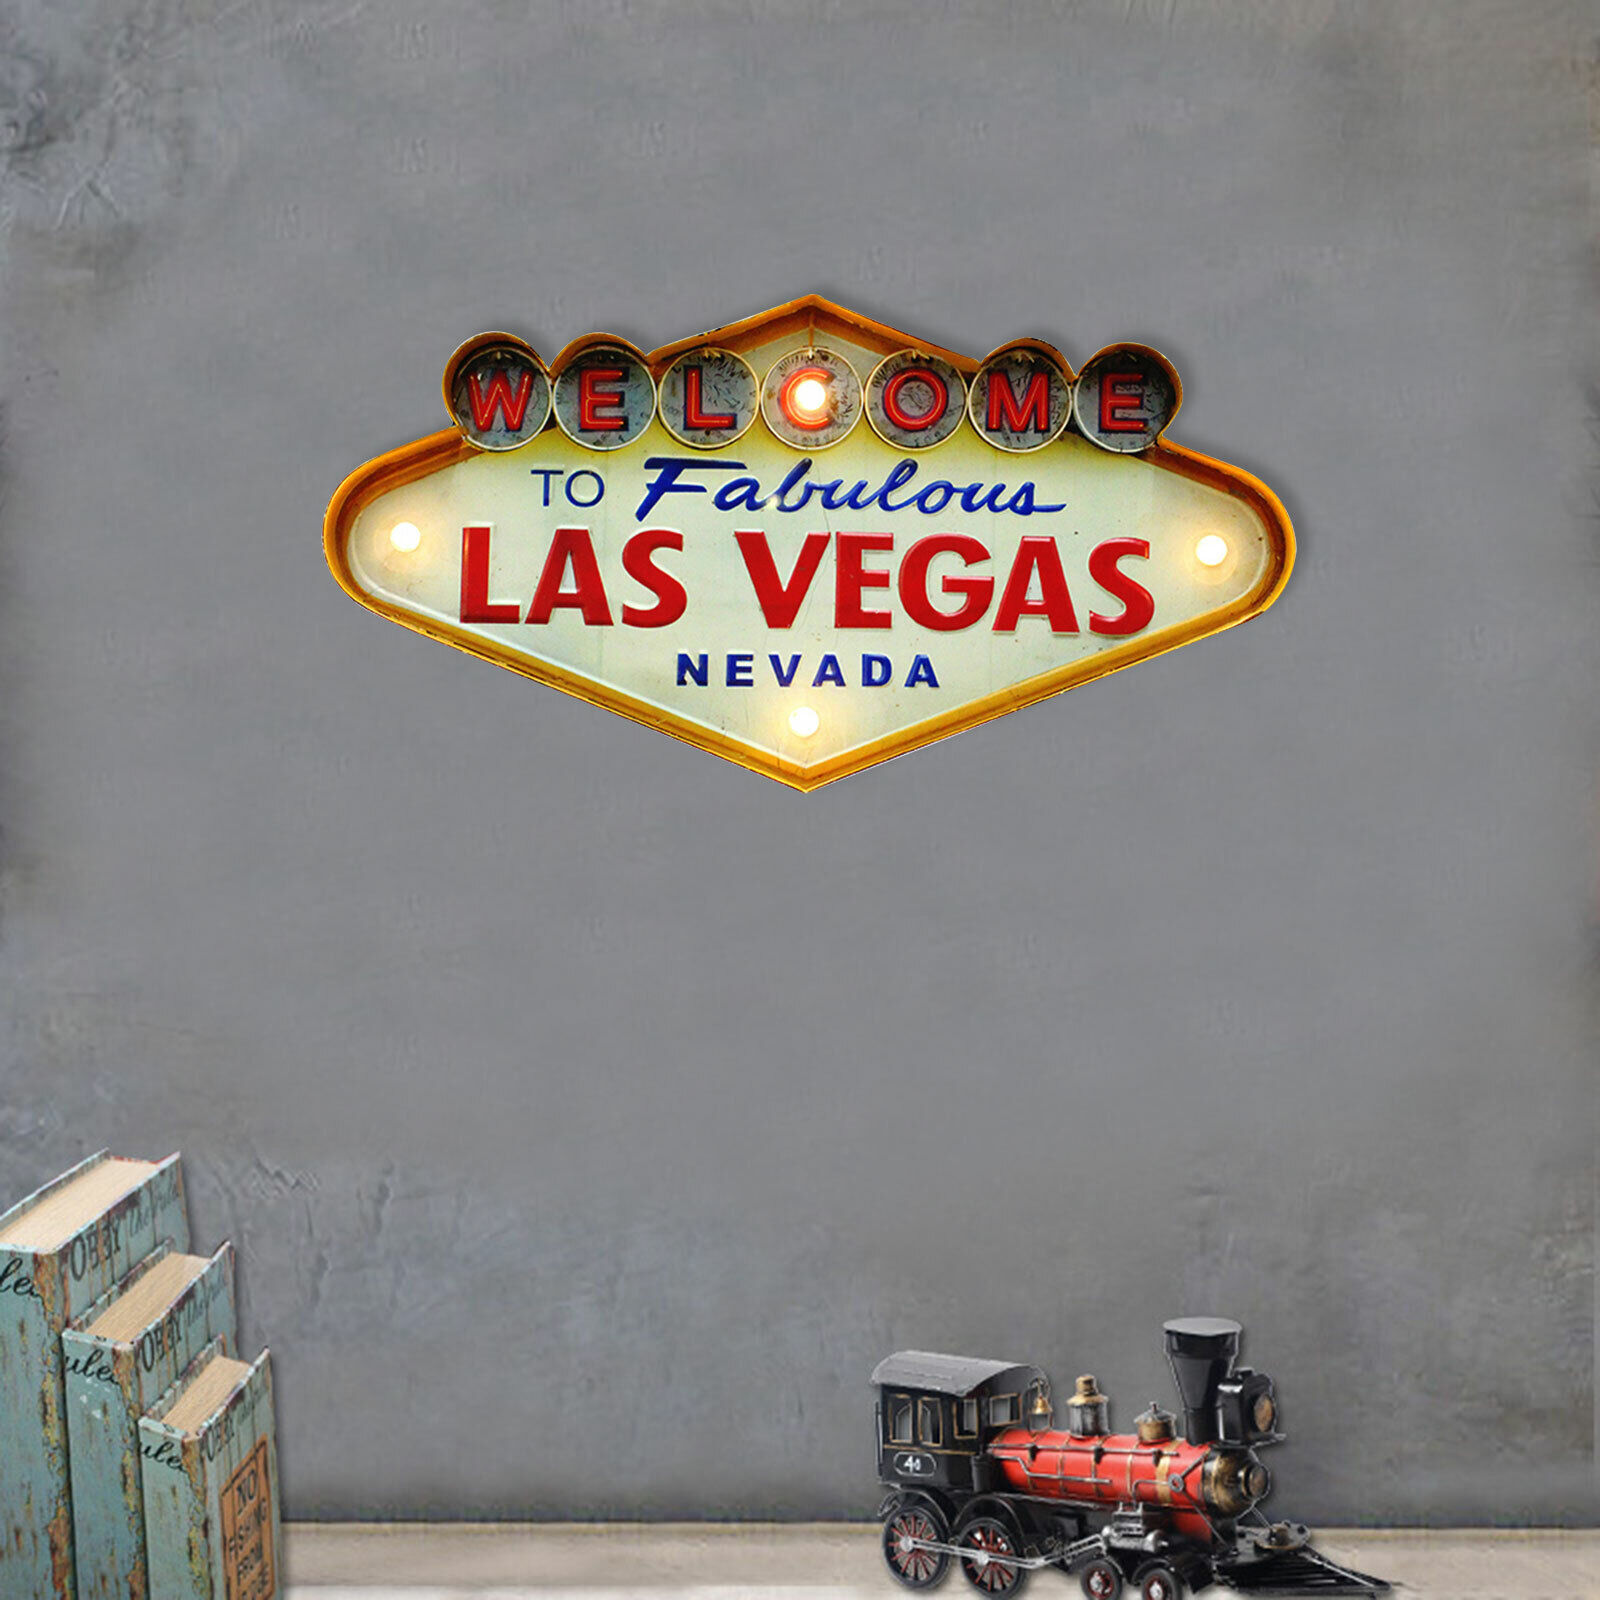 Sign with LED Metal Vintage Neon Signs Gift Welcome to Las Vegas Fit Bar Decor